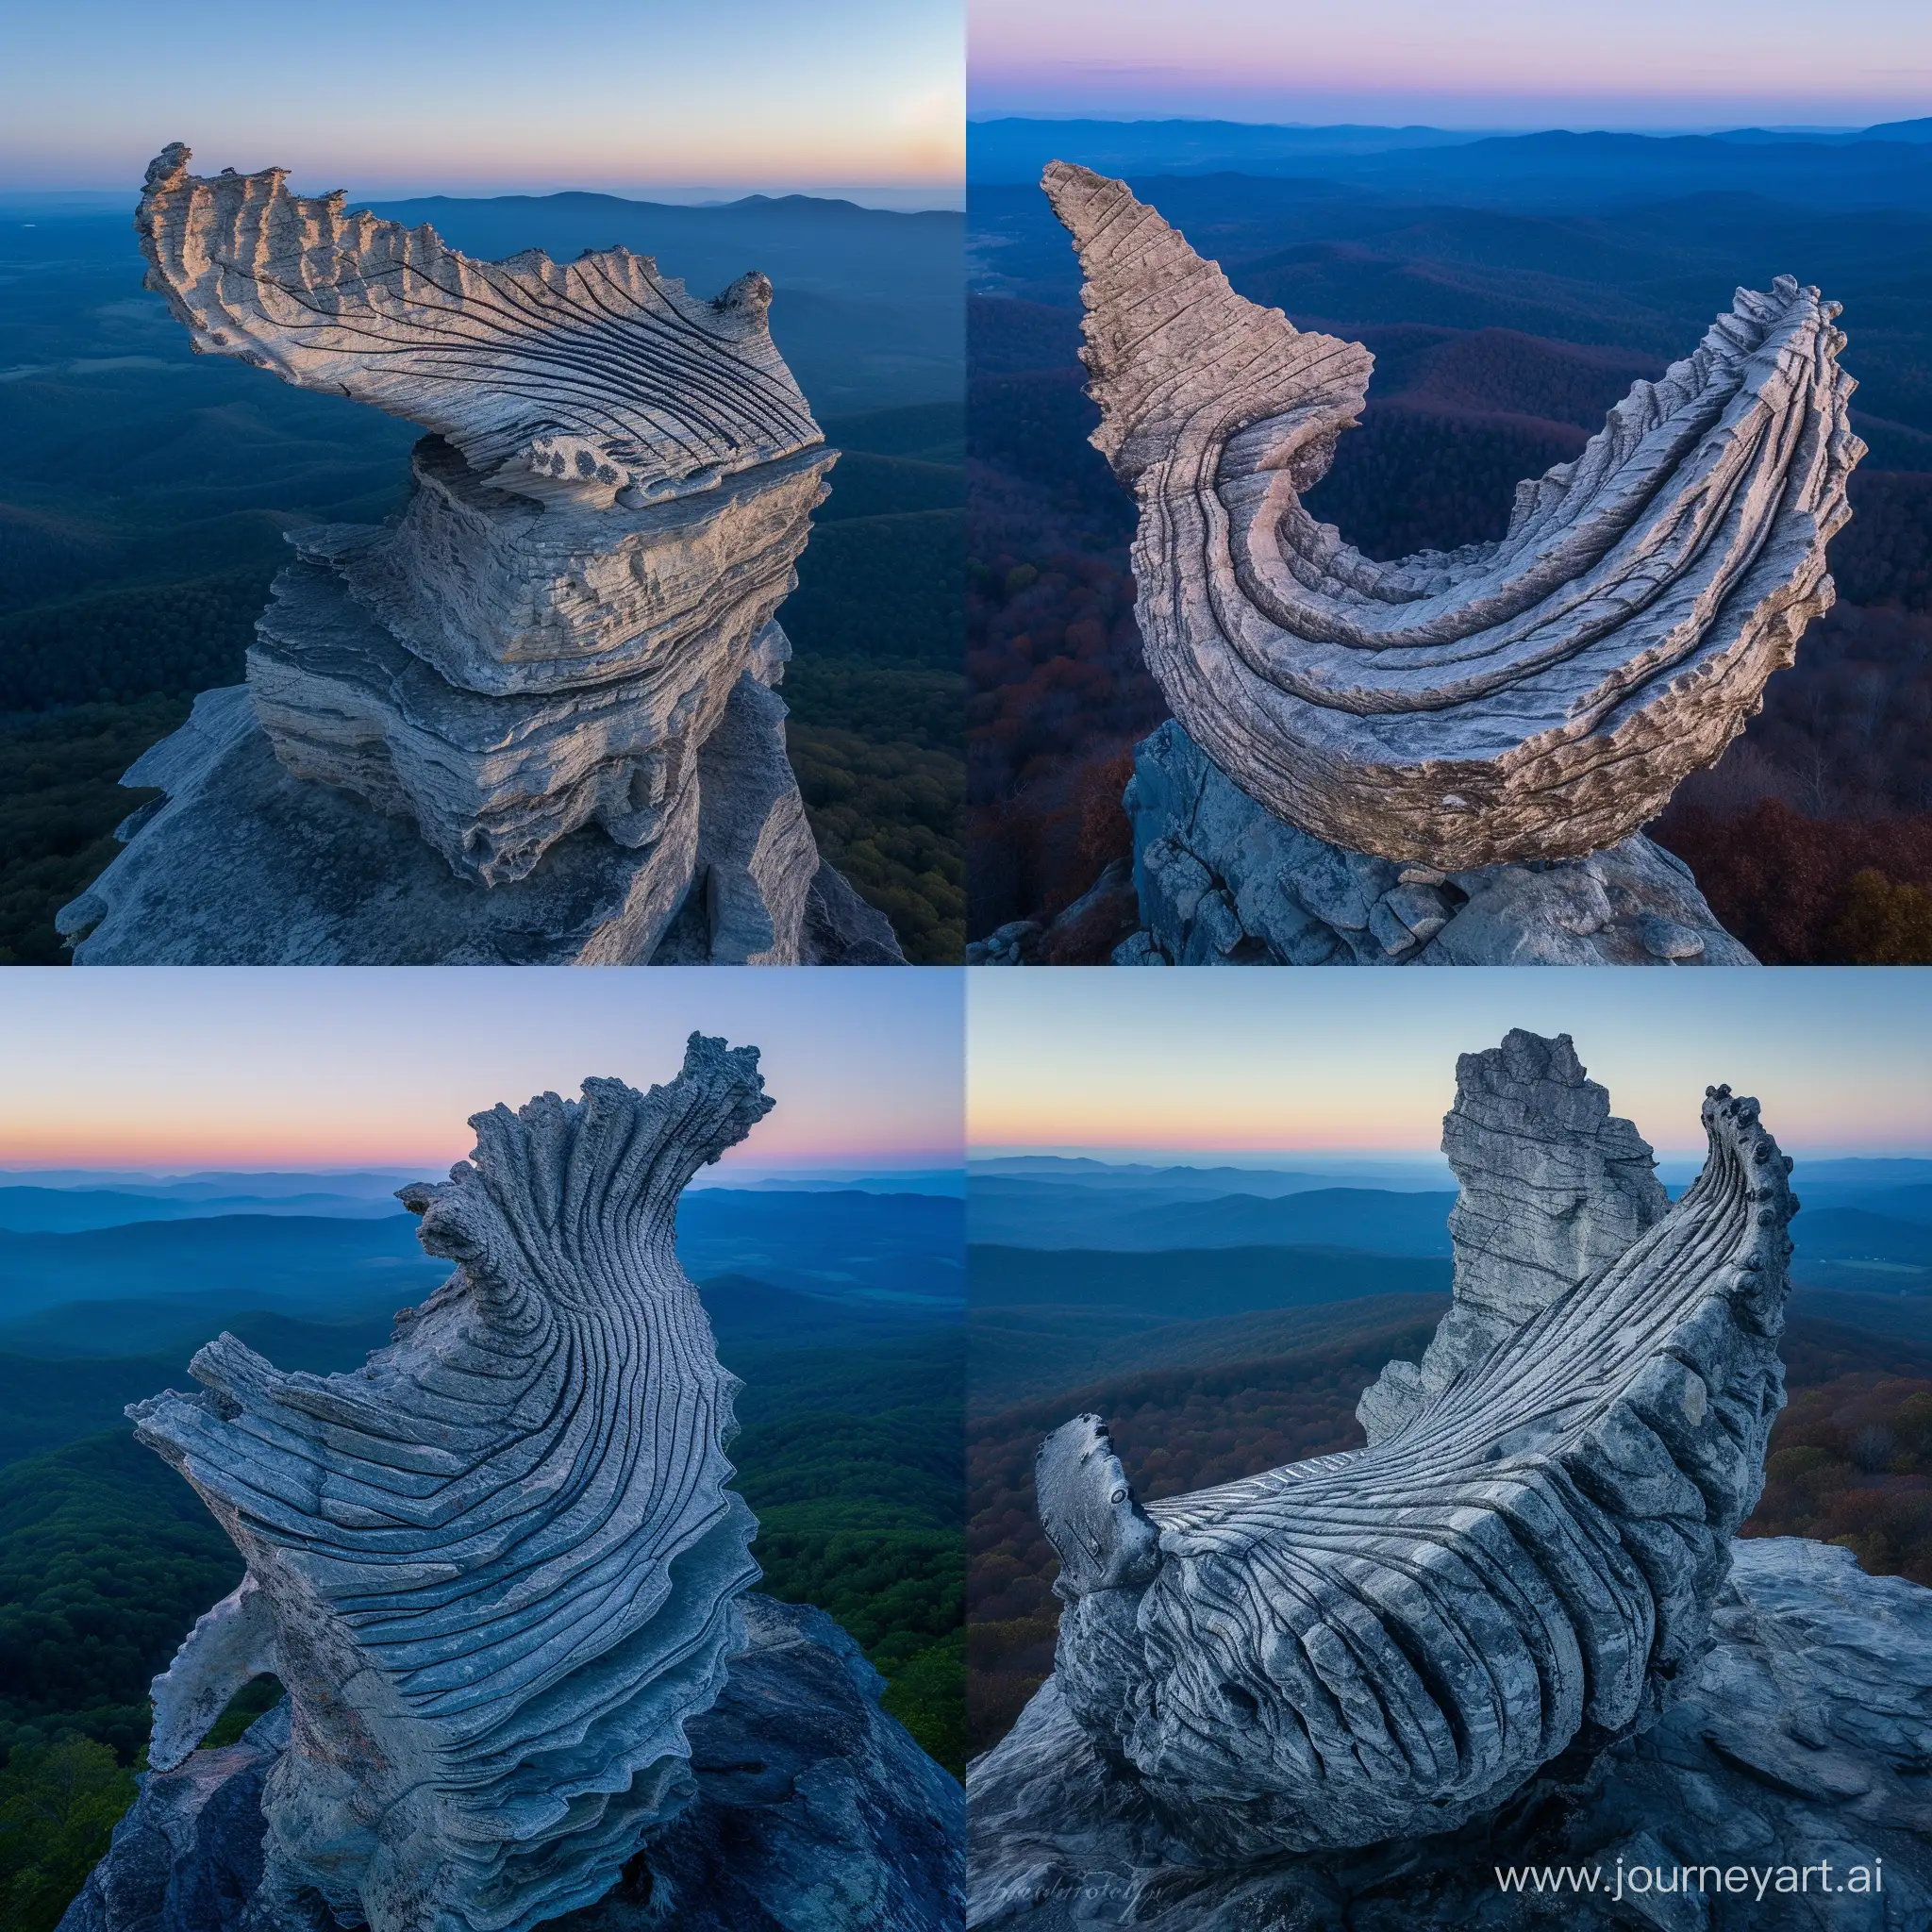 photo of humpback rock outcrop, outcrop is in the shape of a large breaching humpback whale, looks exactly like a humpback whale, outline of a humpback whale, head shape and fin shape visible with striations on the ventral pleats, virginia, rolling blue ridge mountains in the background fading into deep blue, drone photography looking at the outcrop, morning, crisp, award winning landscape, sunrise, beautiful, gently lit by the sunrise